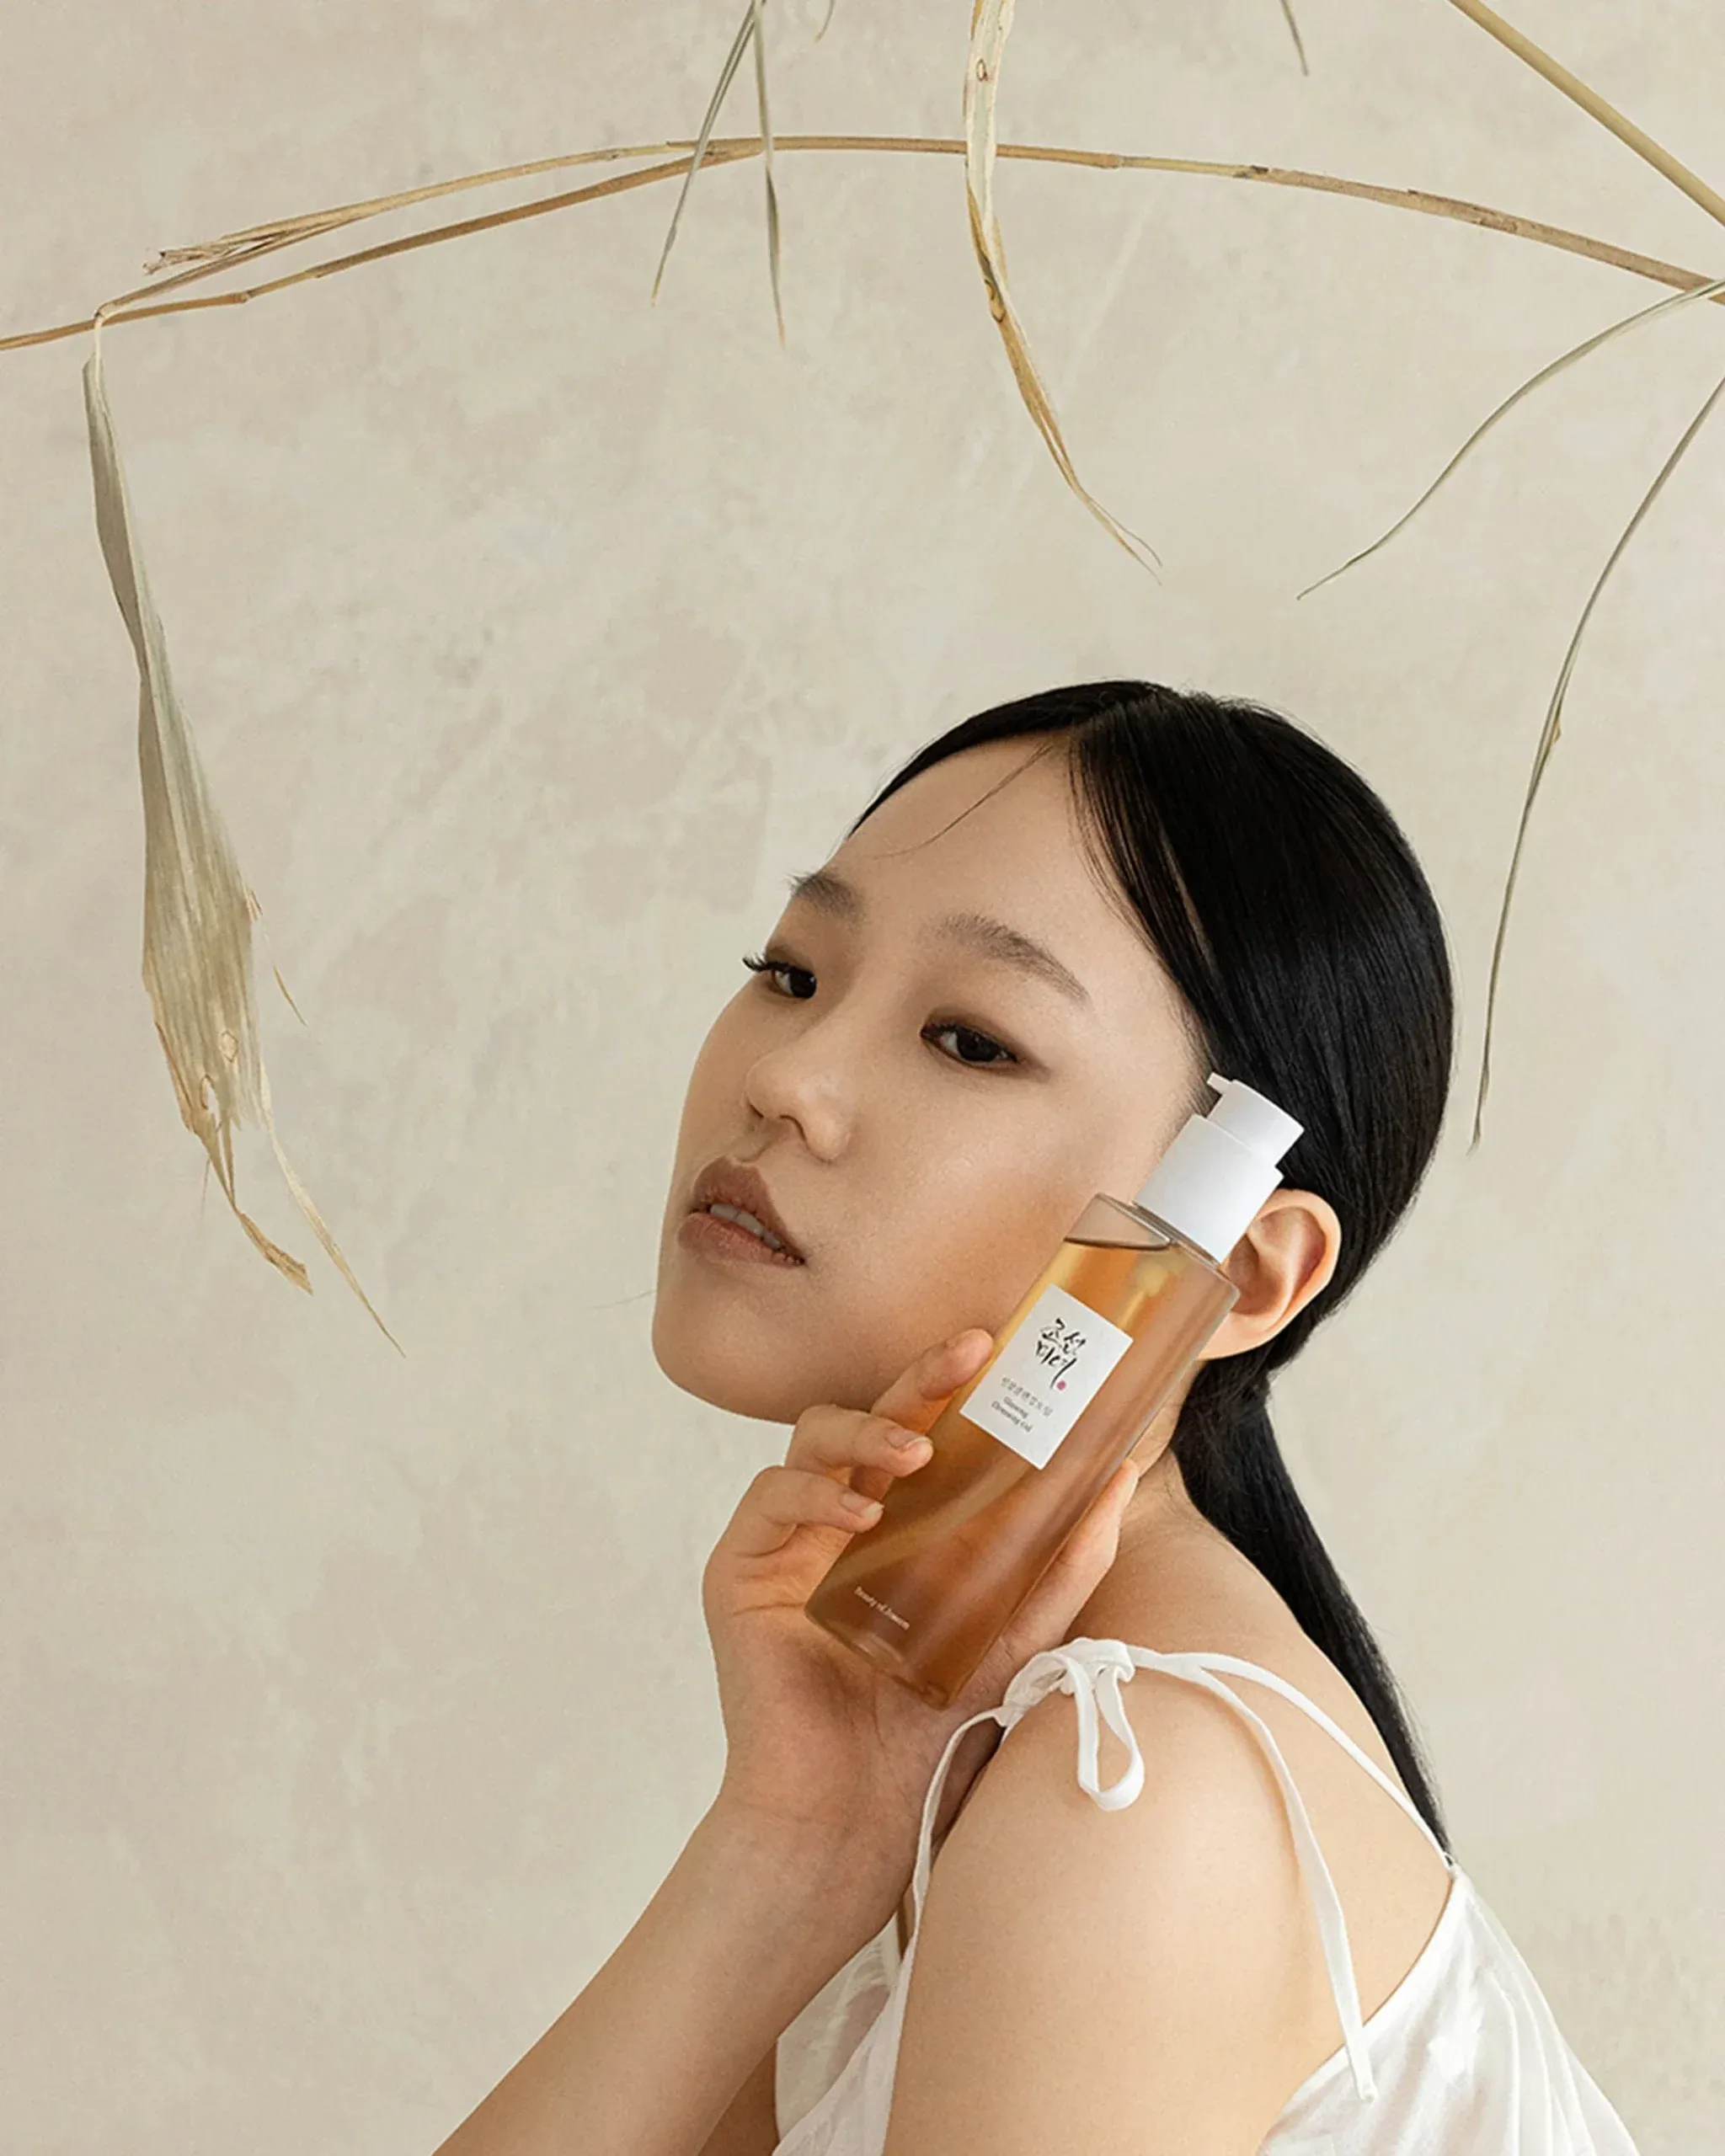 Beauty of Joseon Ginseng Cleansing Oil 210 ml.